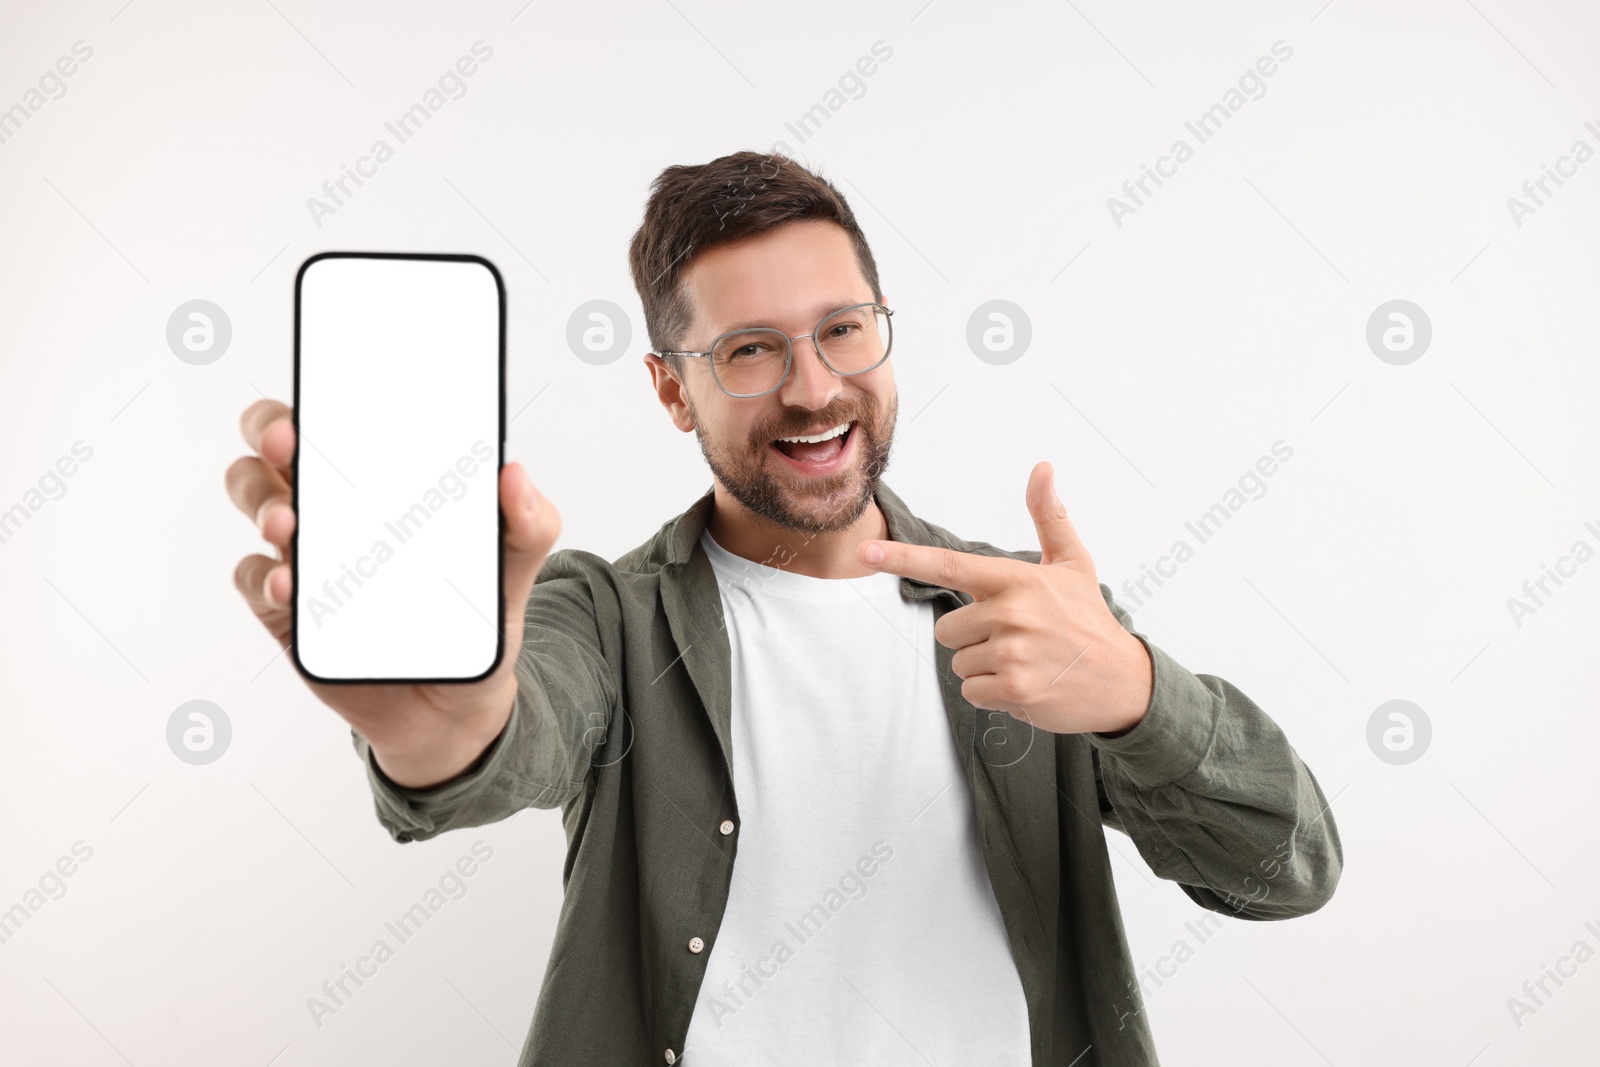 Photo of Handsome man showing smartphone in hand and pointing at it on white background